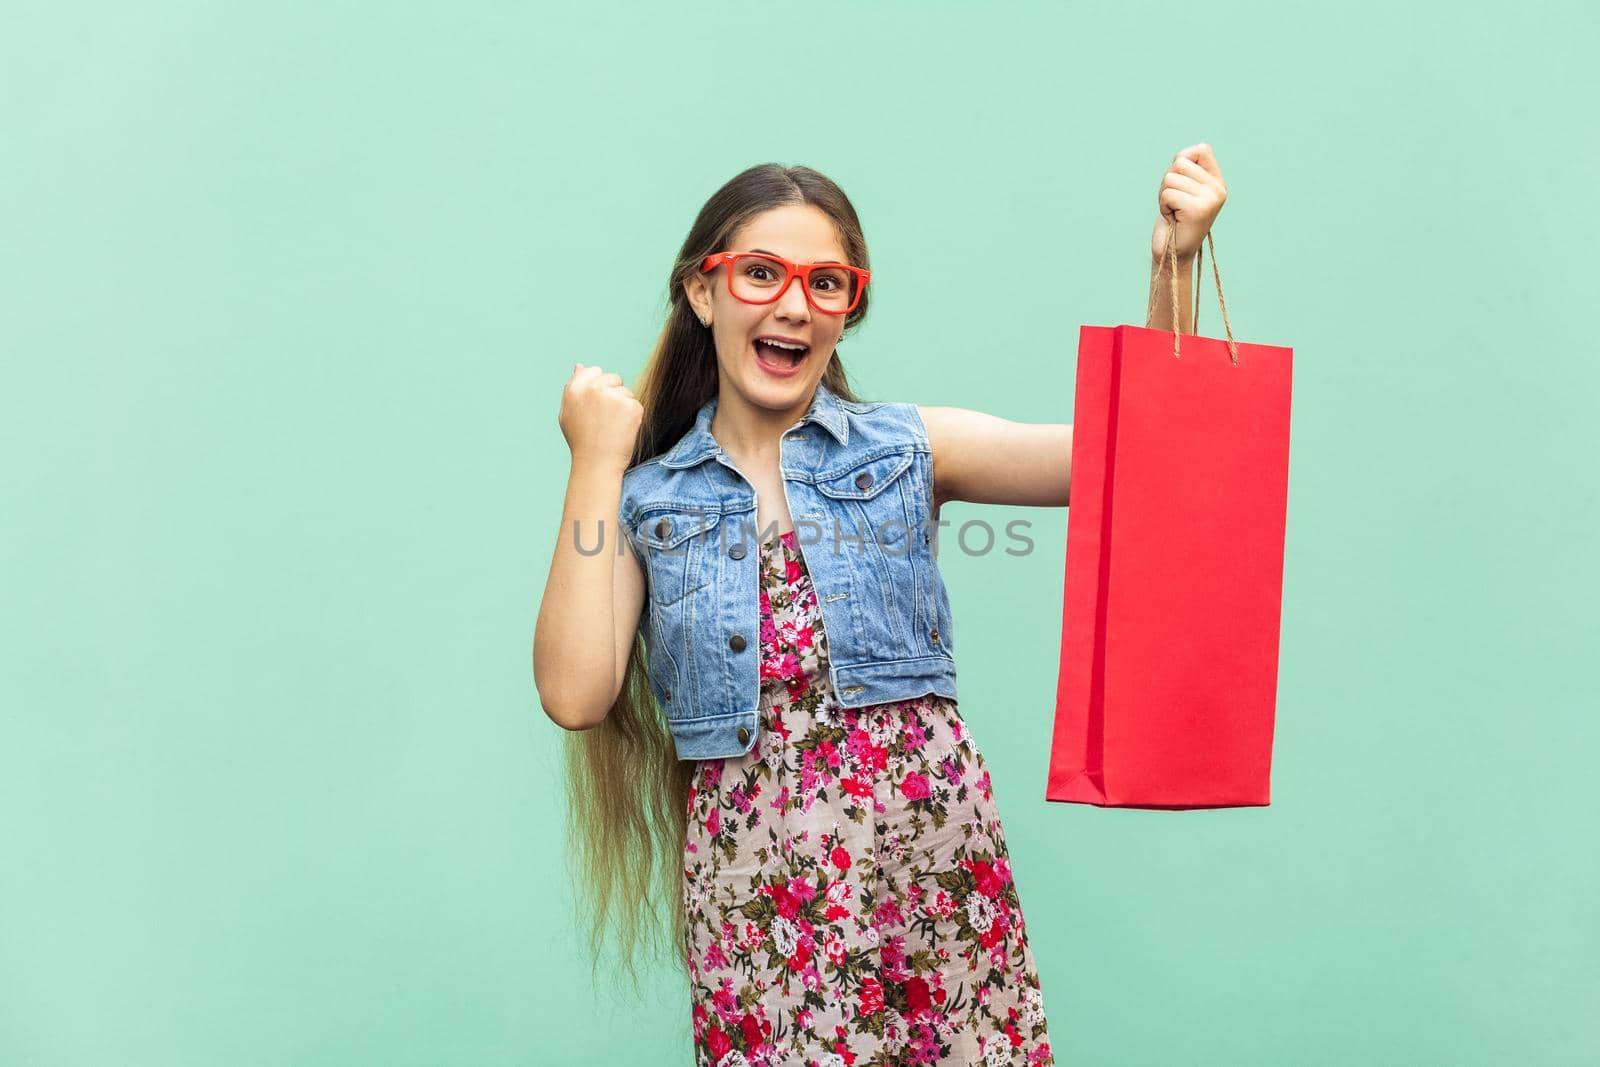 The beautiful long haired girl in casual clothing with shopping bags, looking at camera, celebrates the victory. Blonde model. Sales, shop, retail, consumer concept. Isolated studio shot on light blue background